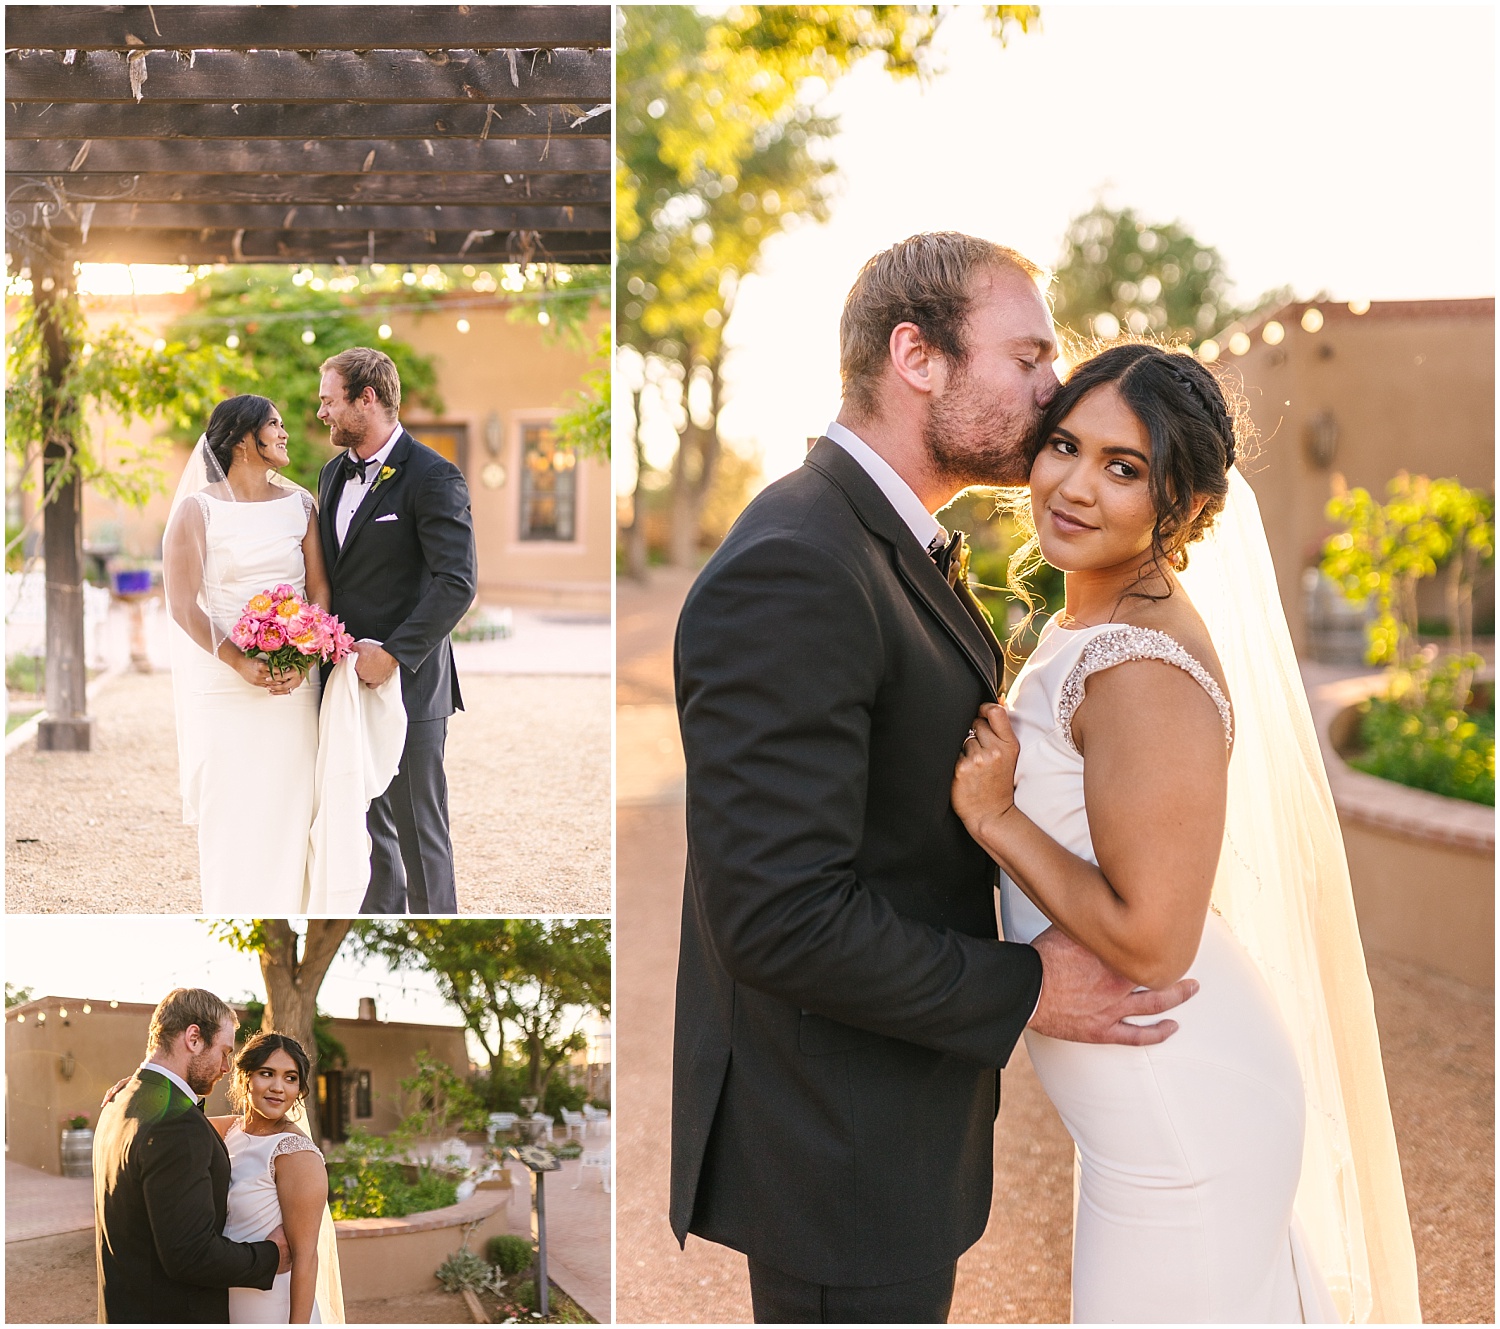 Golden hour wedding portraits at Casa Perea Art Space in Corrales New Mexico